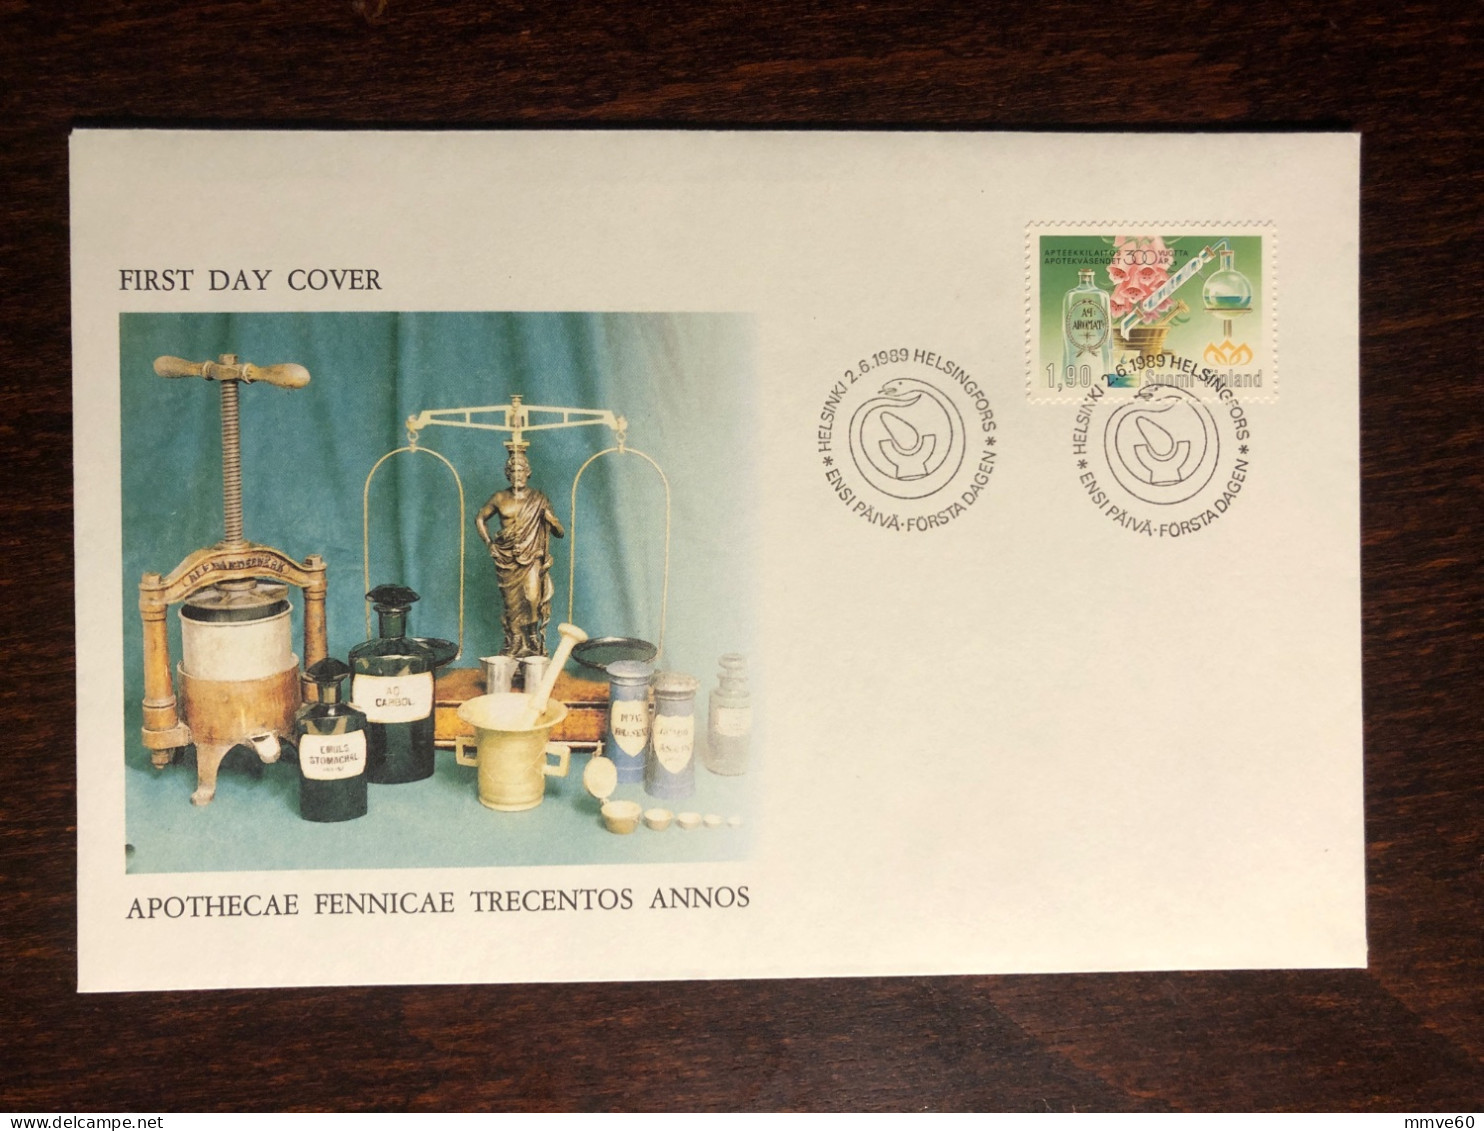 FINLAND FDC COVER 1989 YEAR PHARMACY PHARMACOLOGY HEALTH MEDICINE STAMPS - Storia Postale